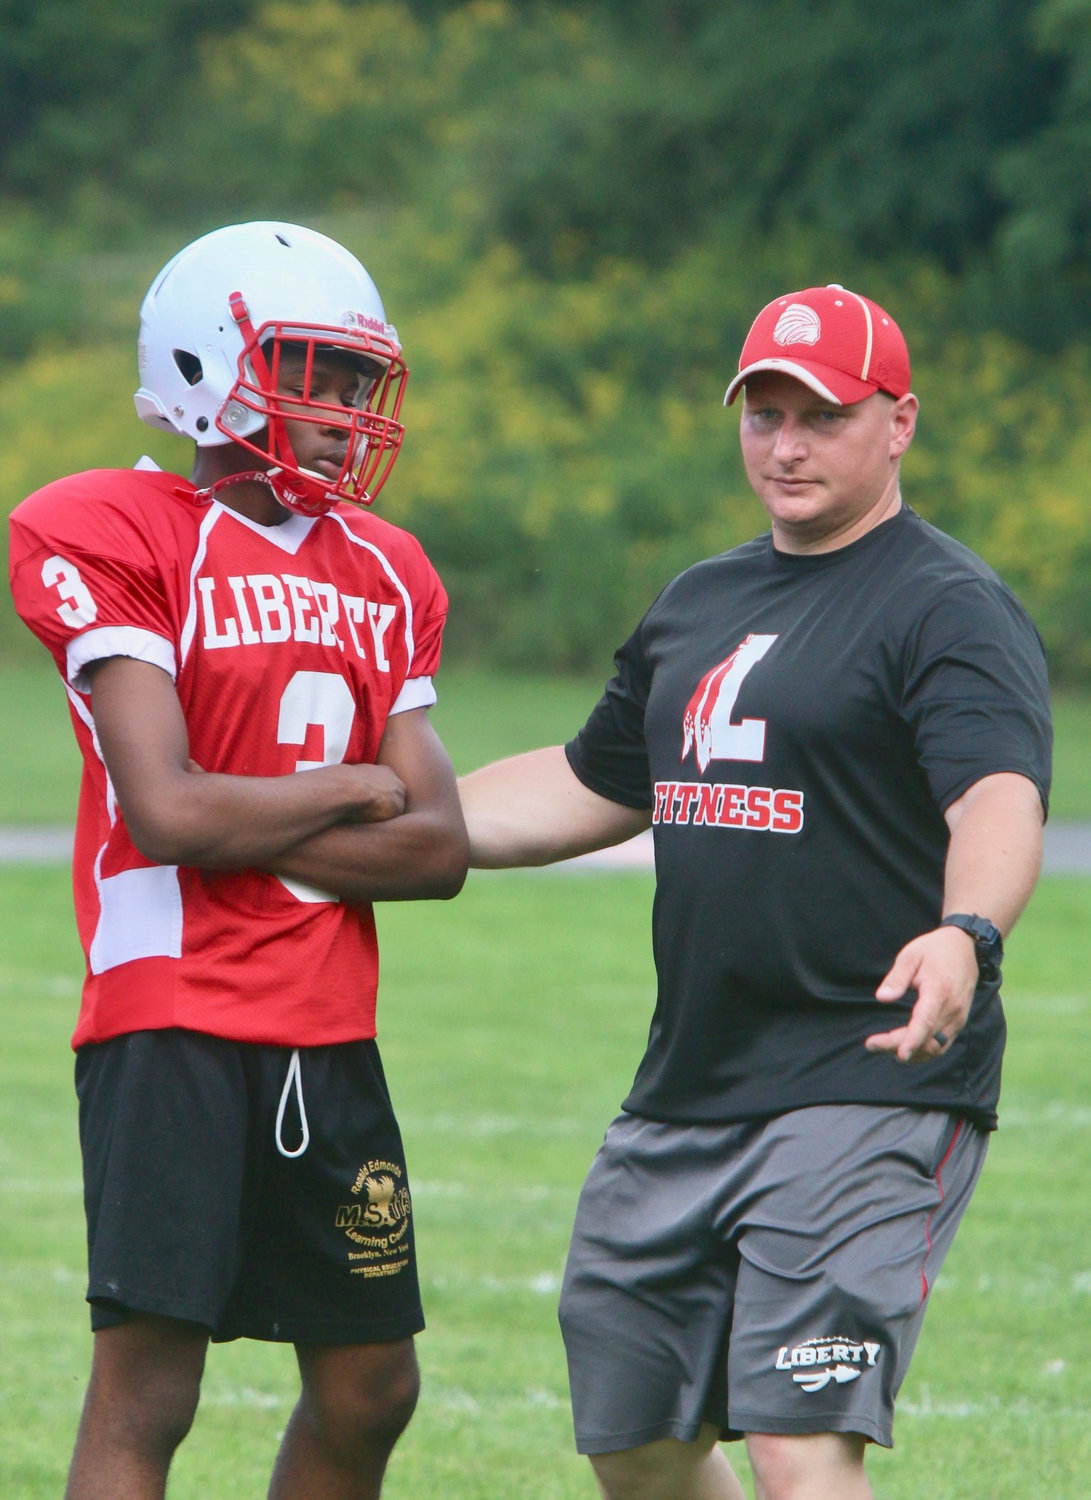 Liberty head football coach counsels junior running back/cornerback Giovanni Dudley on a kickoff drill. A clap of thunder mandated a quick exit from the field but when the skies cleared the Indians were right back at it. Look for a resurgence of Liberty Indians football under the tutelage of newly appointed head football coach Adam Lake.